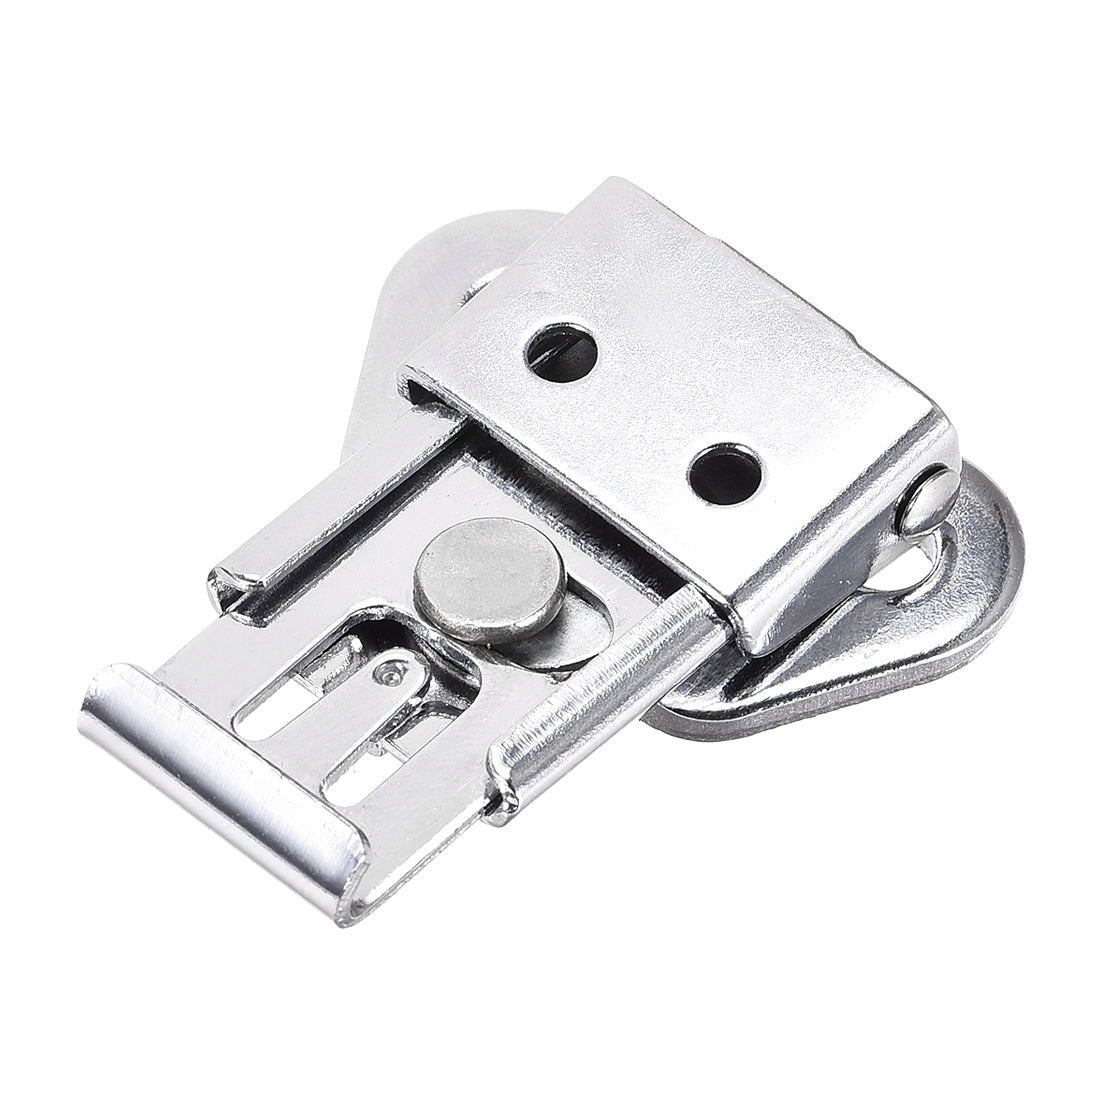 uxcell Uxcell 1.57-inch Iron Butterfly Twist Latch Keeper Toggle Clamp - 2 Pcs (Silver)